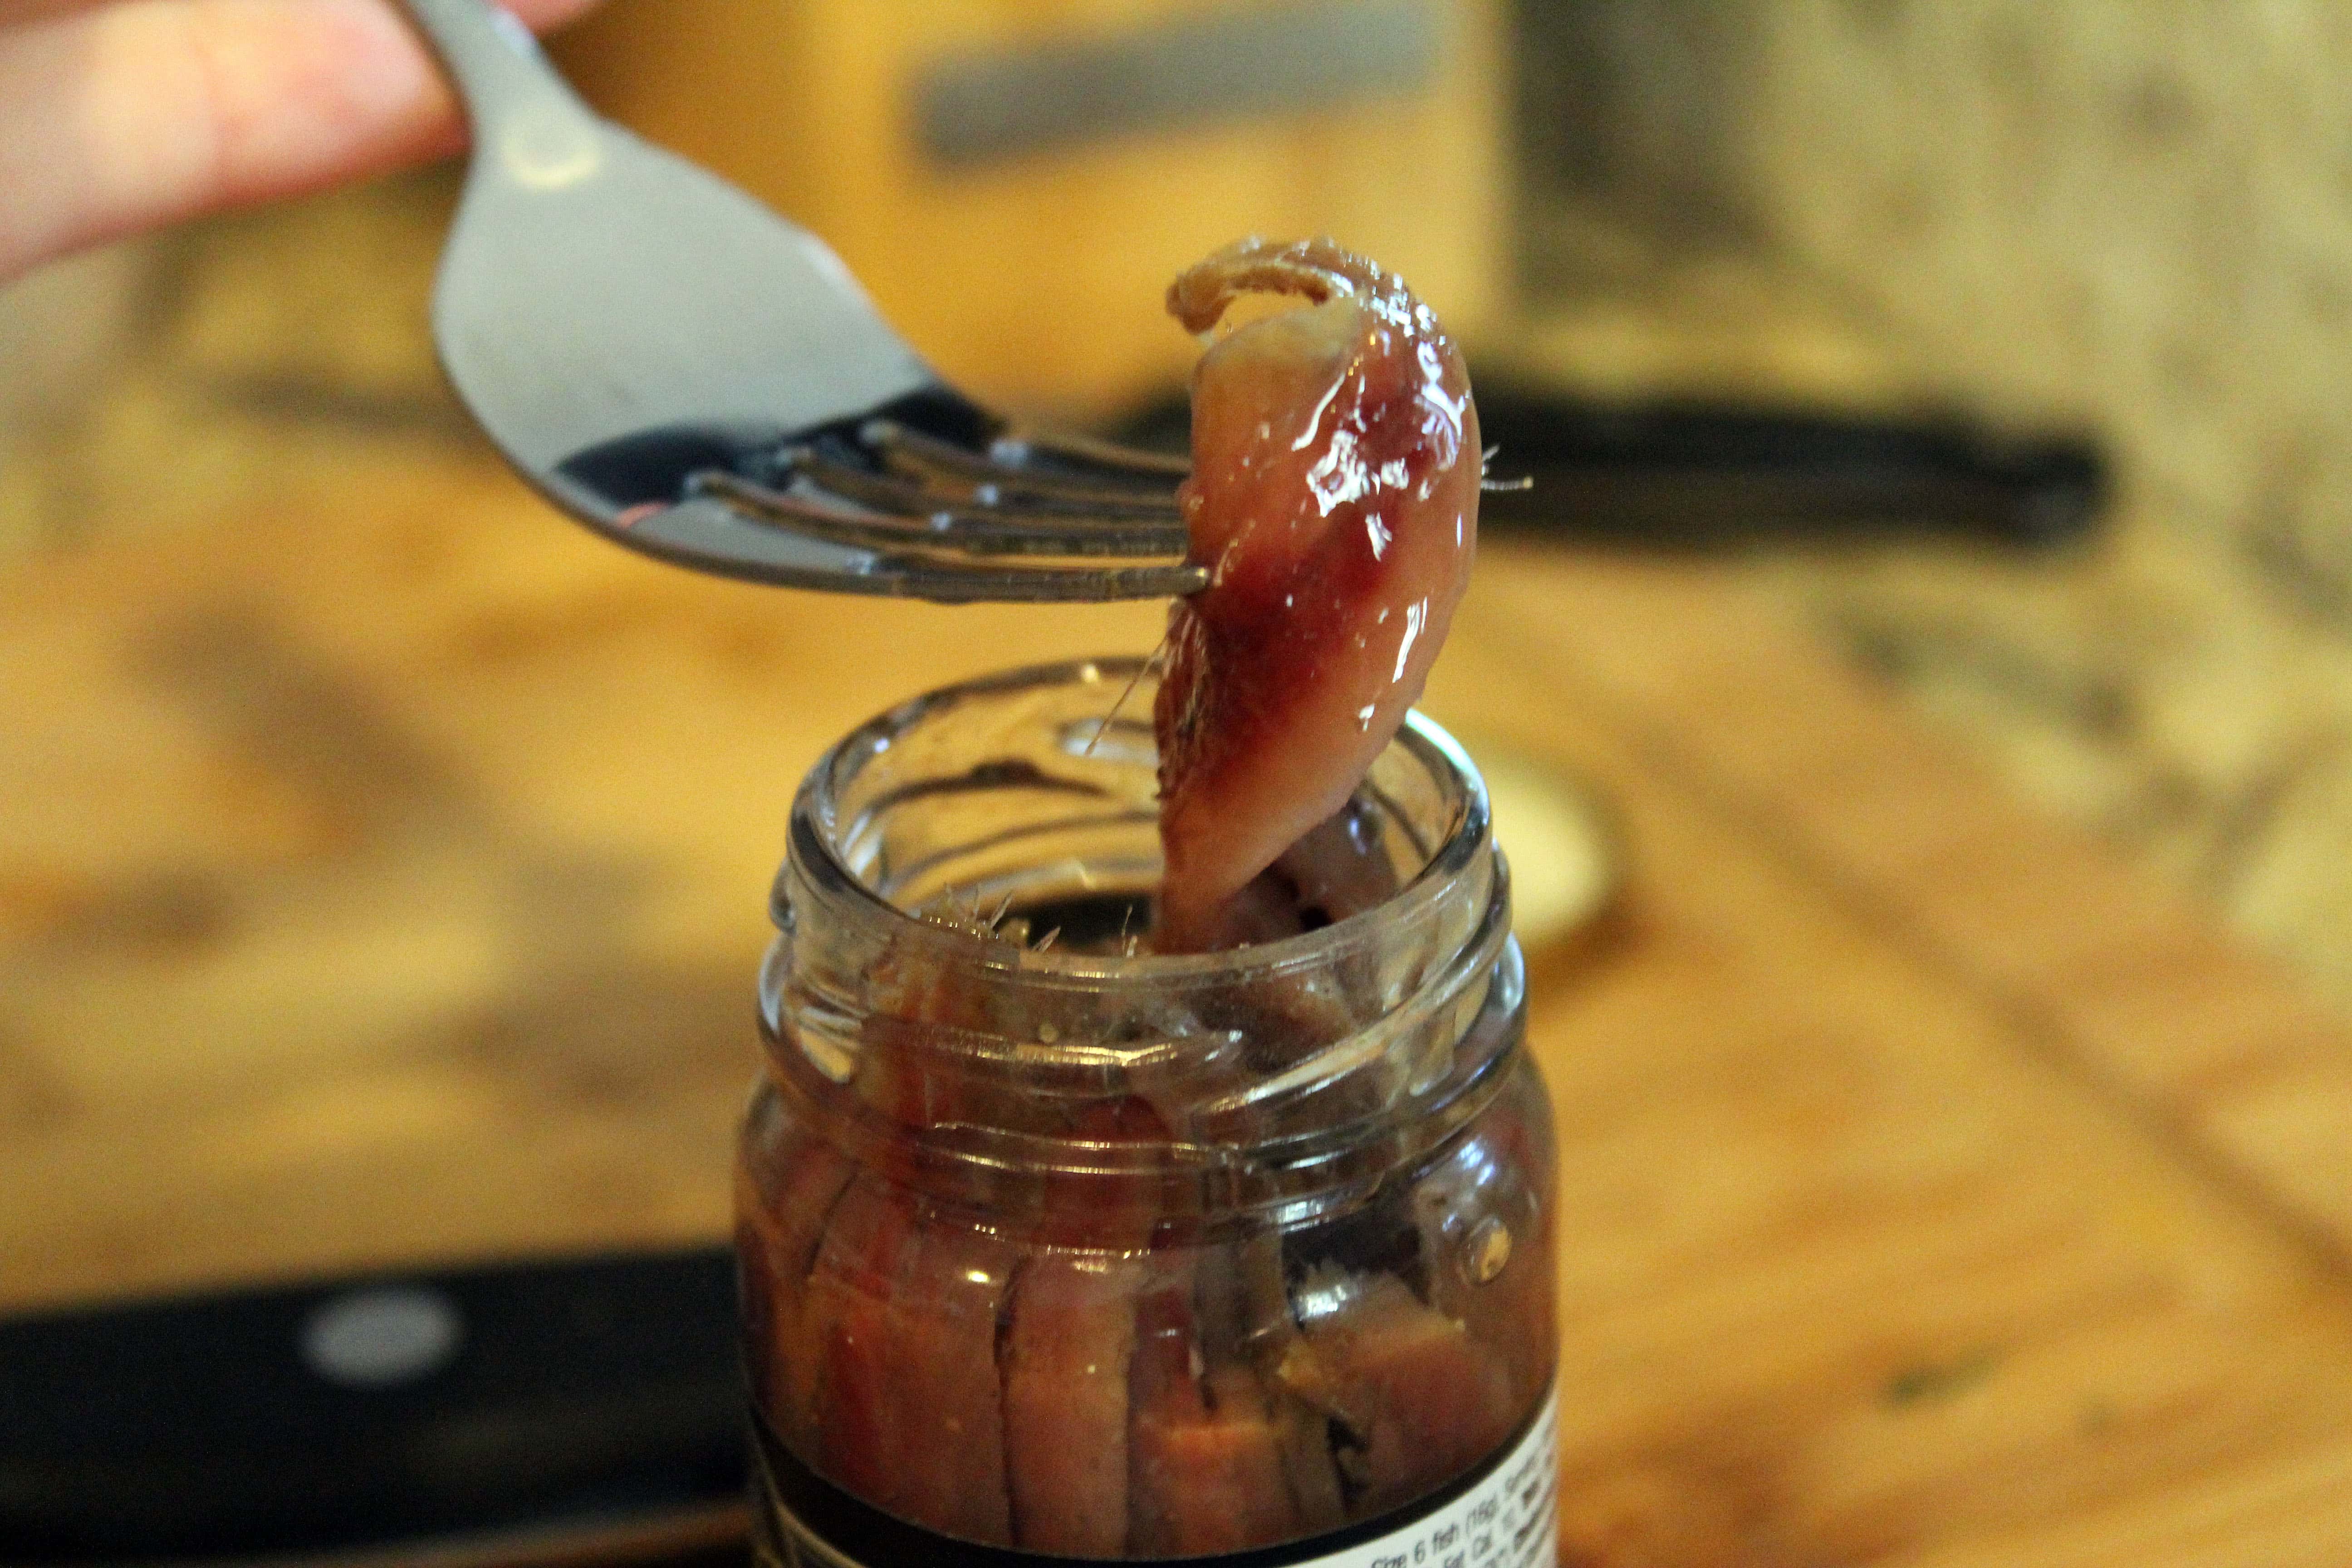 Remove anchovies from jar